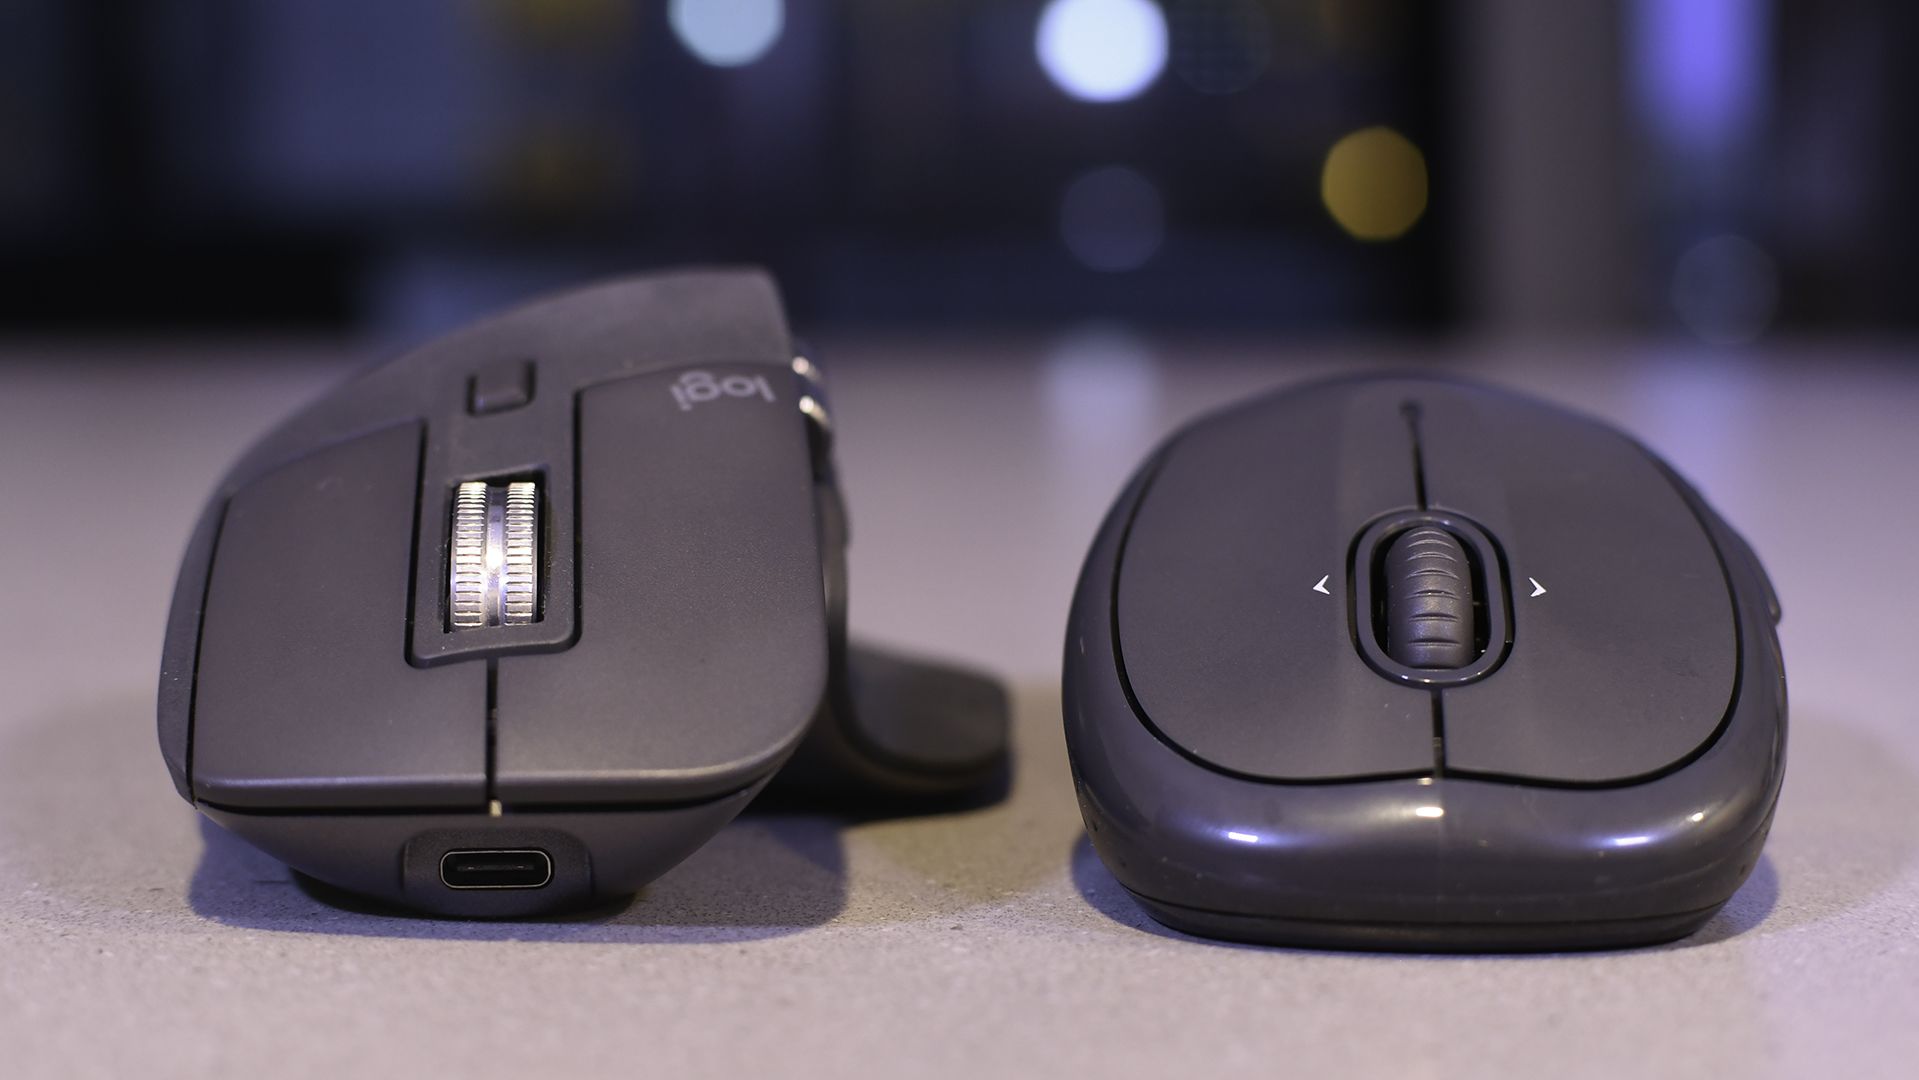 Wired Vs Wireless Which Mouse Is Better for Your Gaming Experience